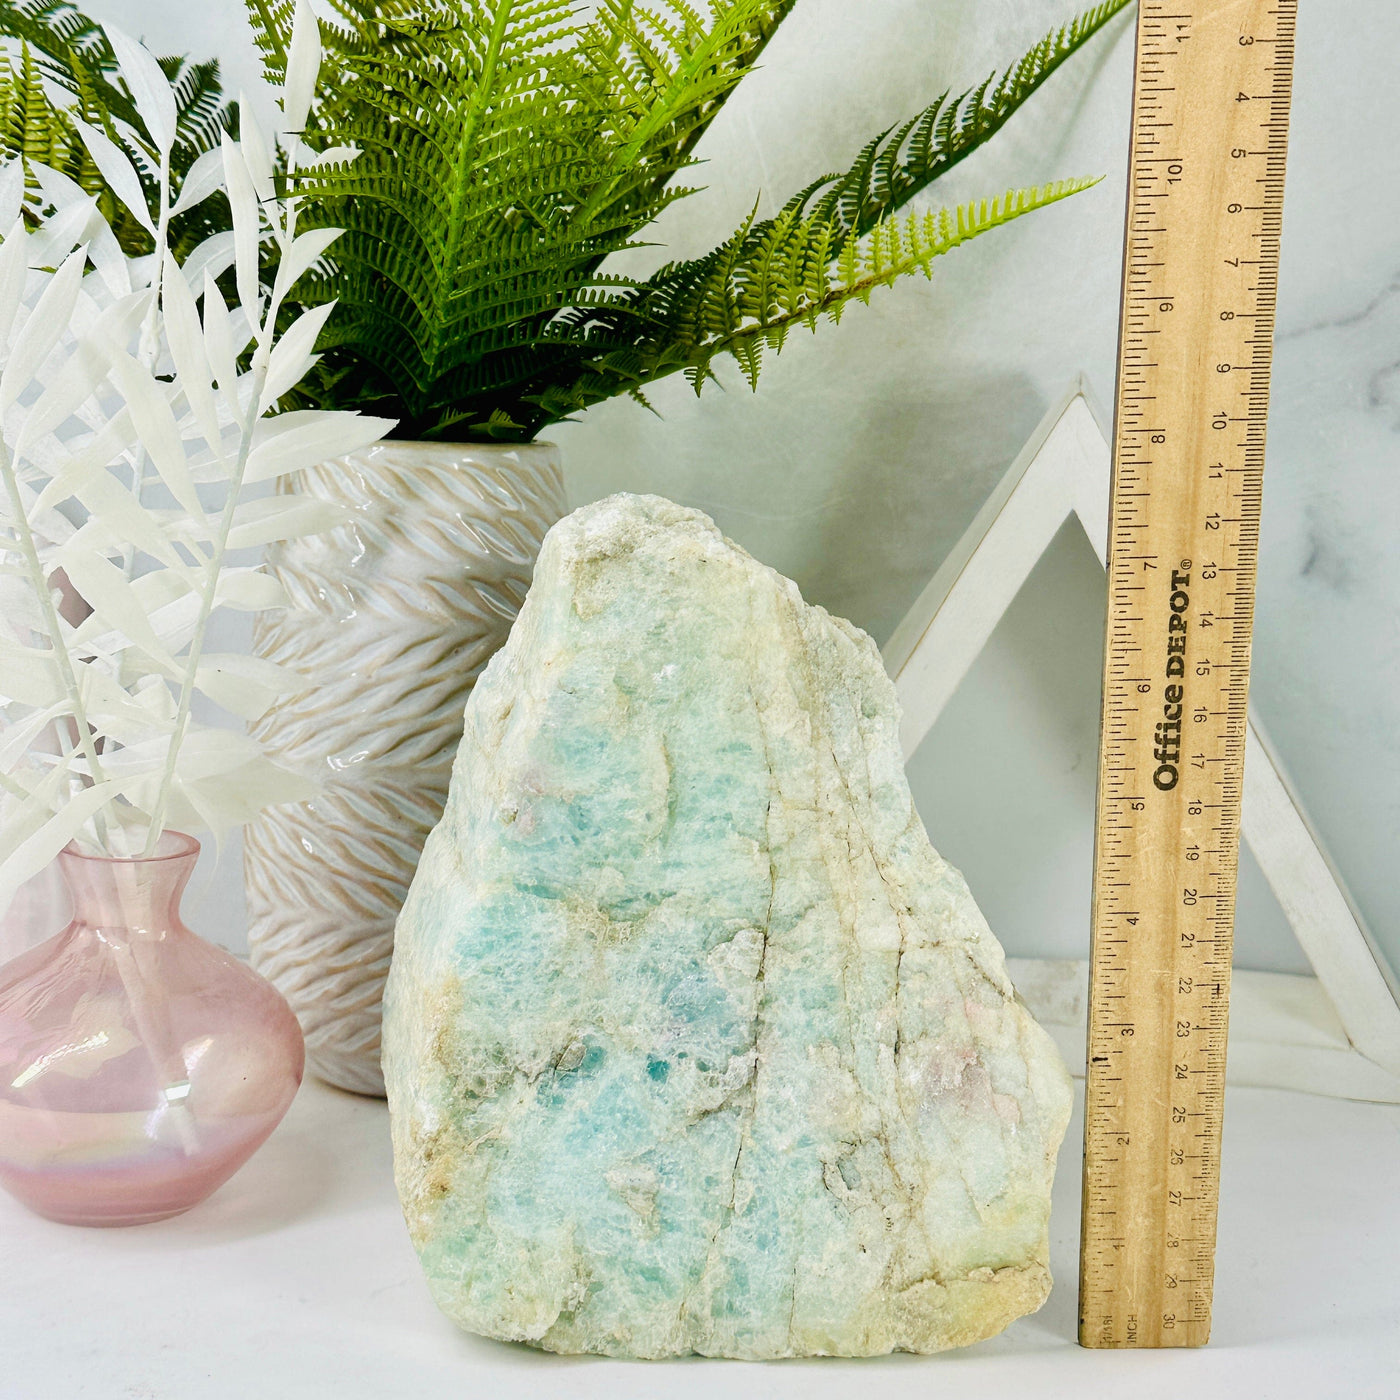 Aquamarine with Mica - large rough natural crystal with ruler for size reference